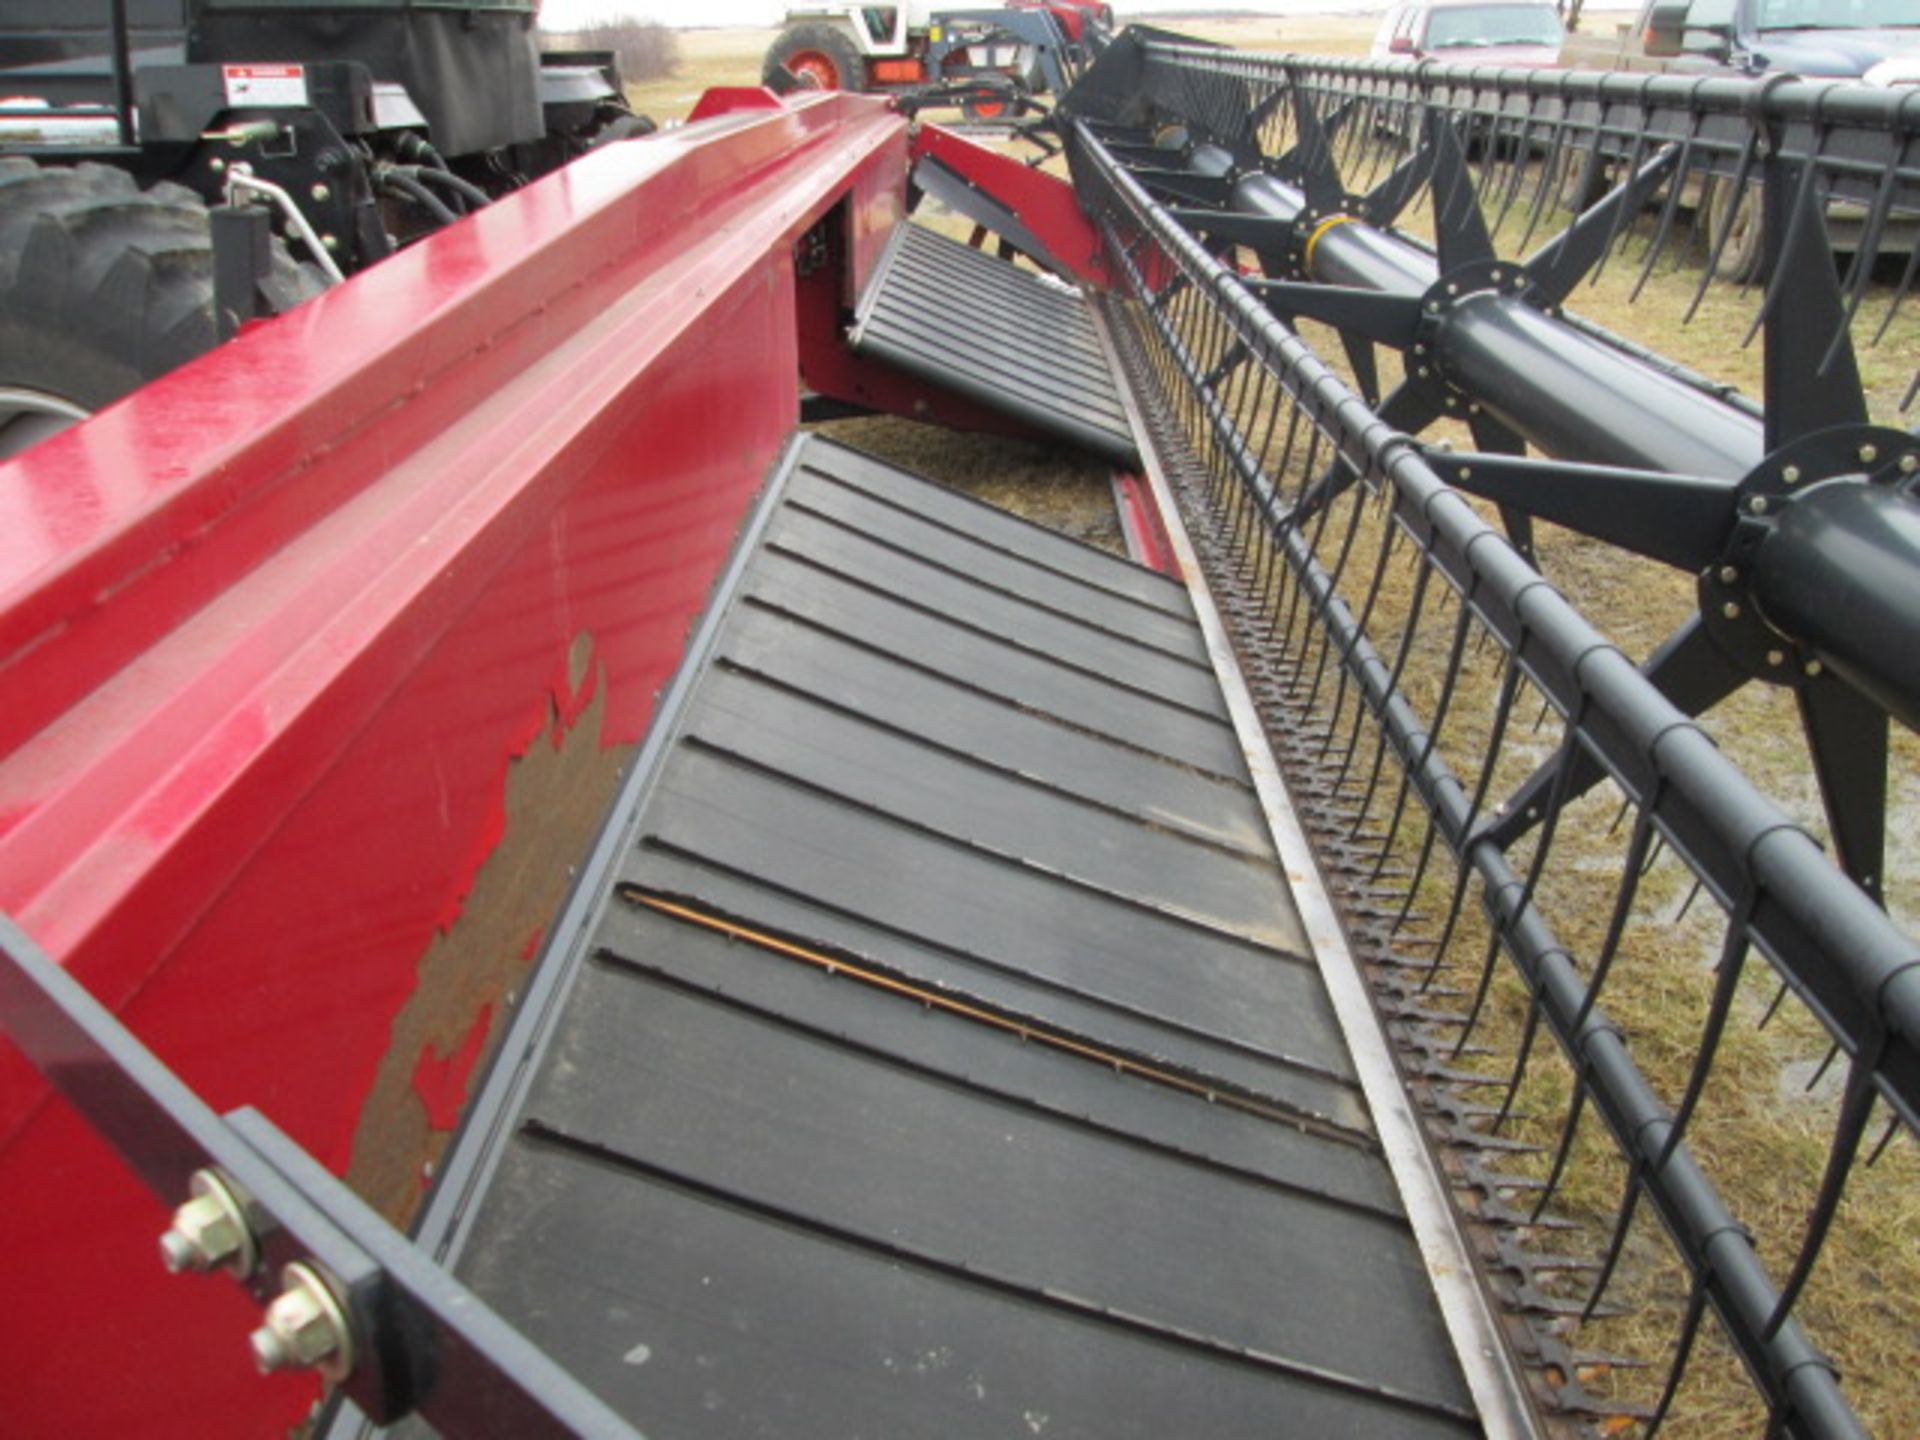 Case WDX 1202 S swather (2005), c/w 30' DHX 302 header (2007), showing 795 eng hr, dbl knife - Image 23 of 32